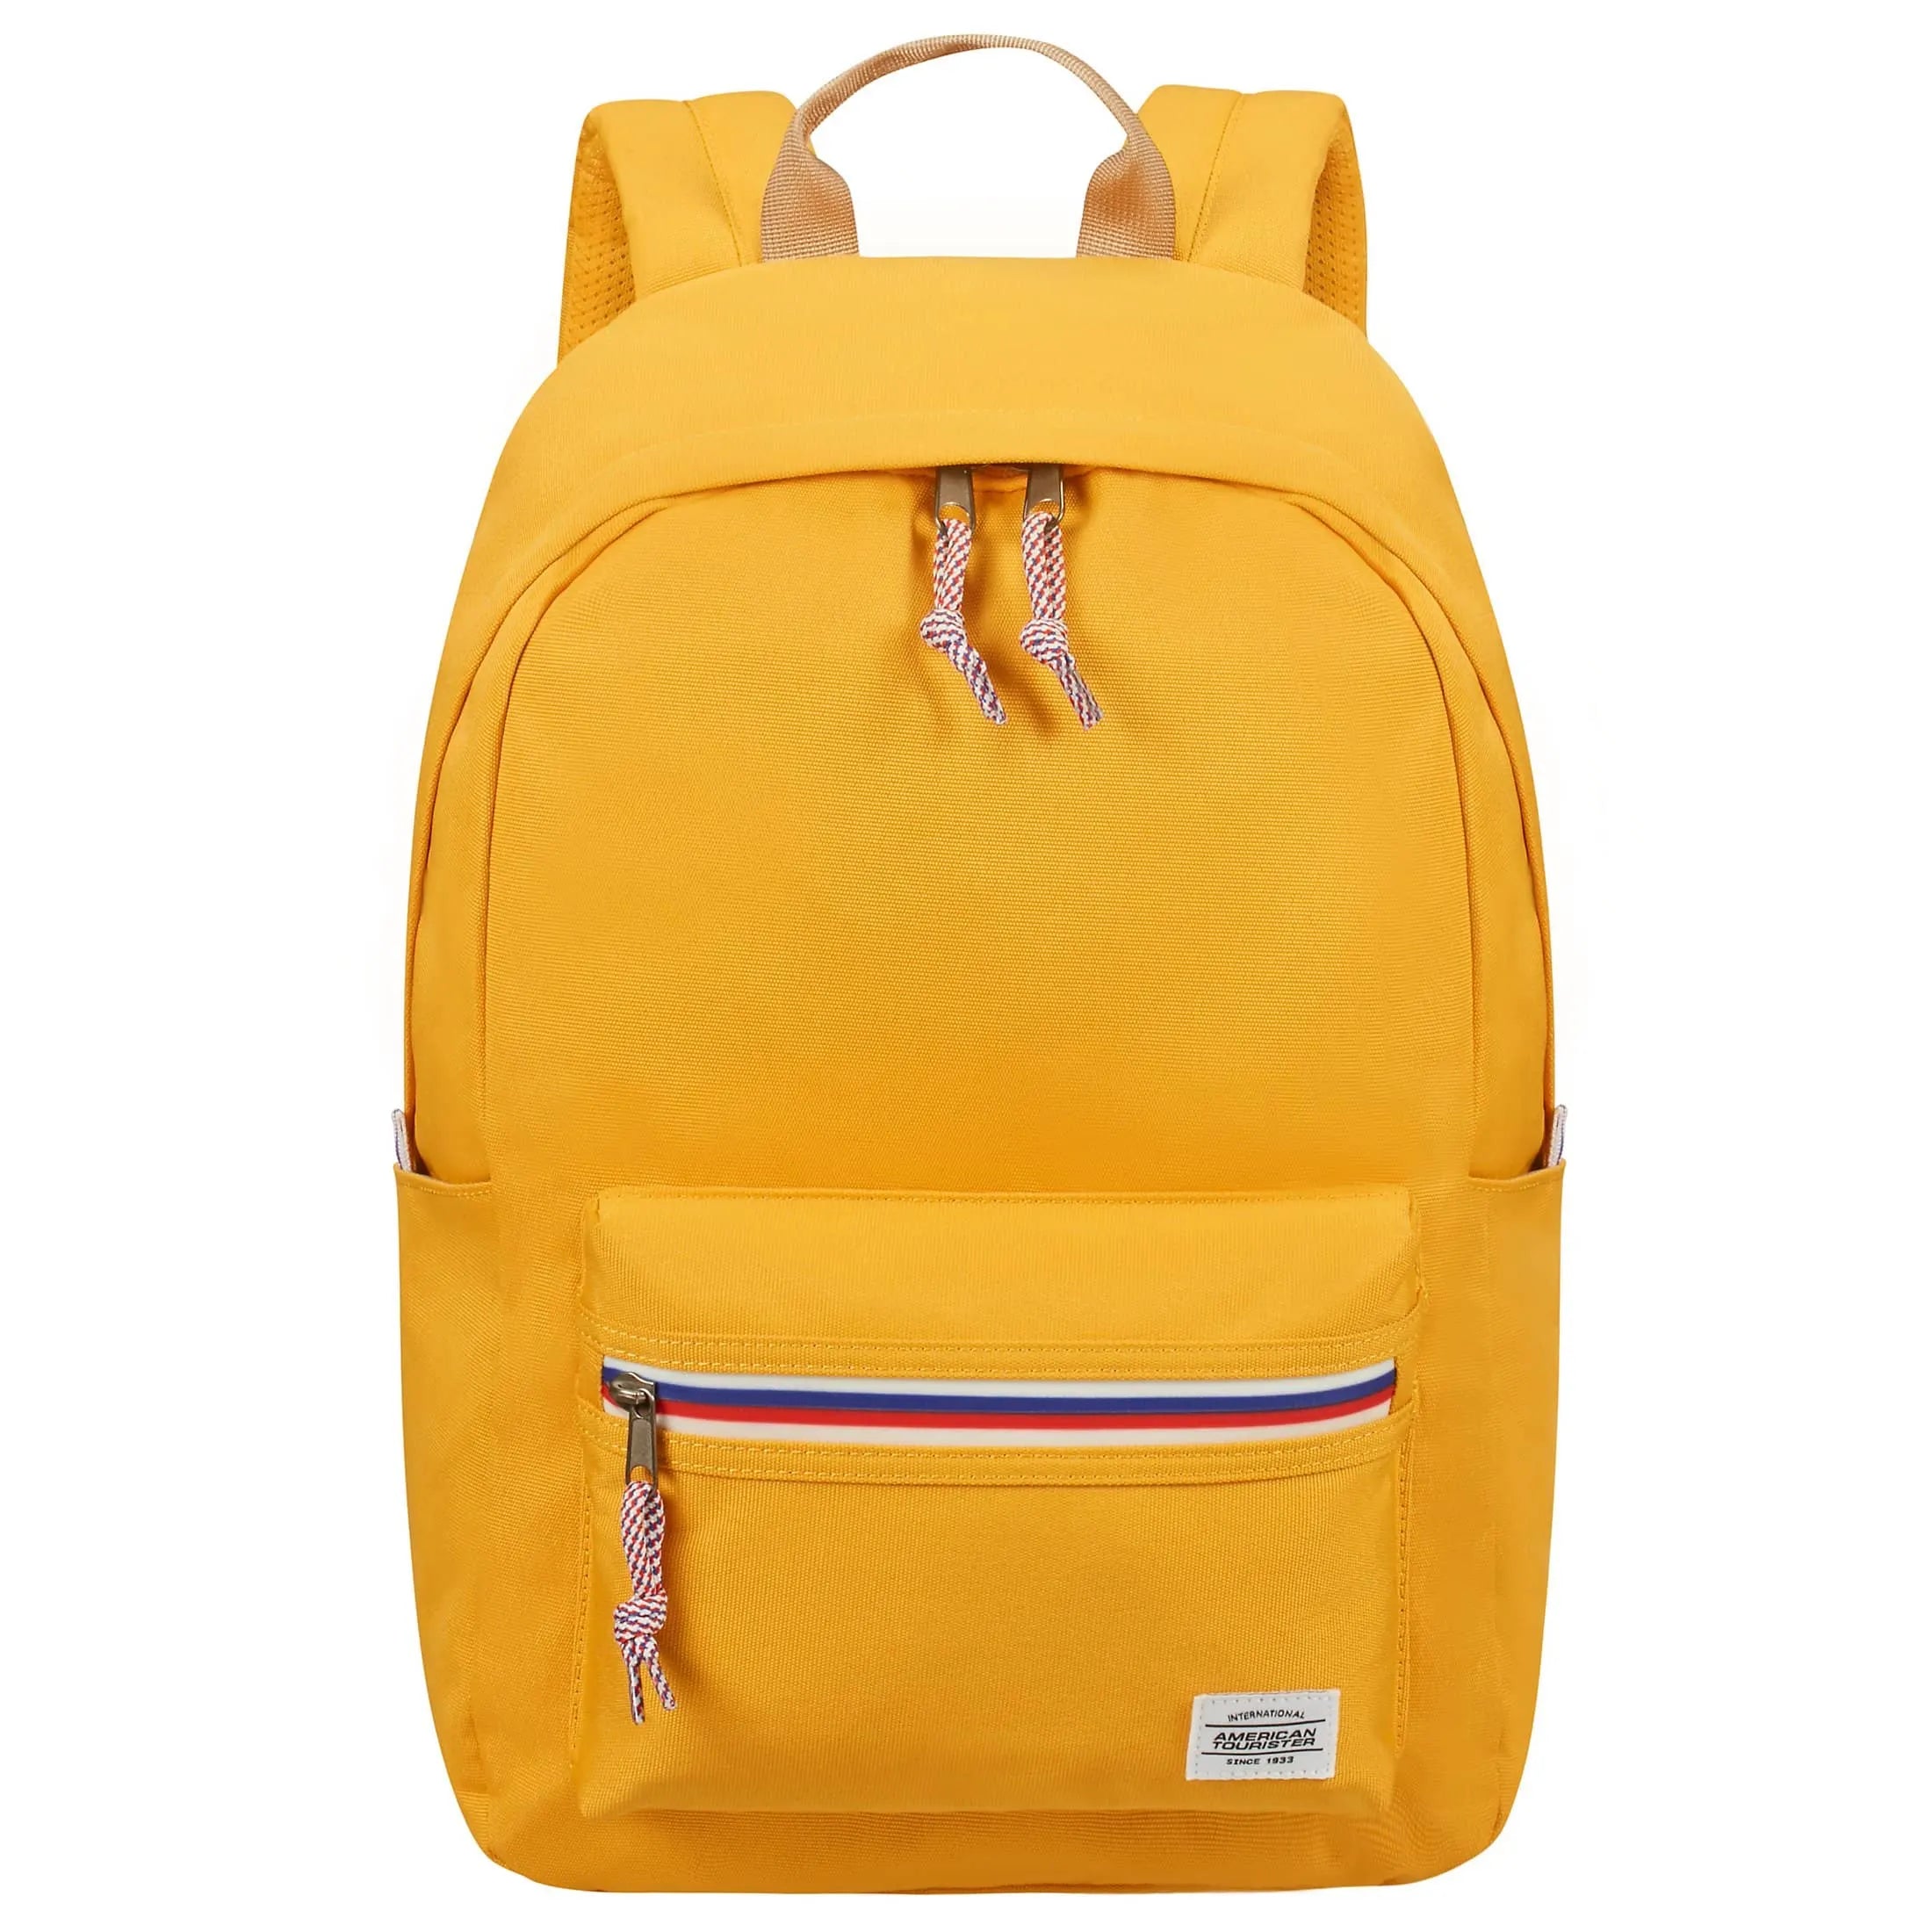 American Tourister Upbeat leisure backpack 42 cm - yellow